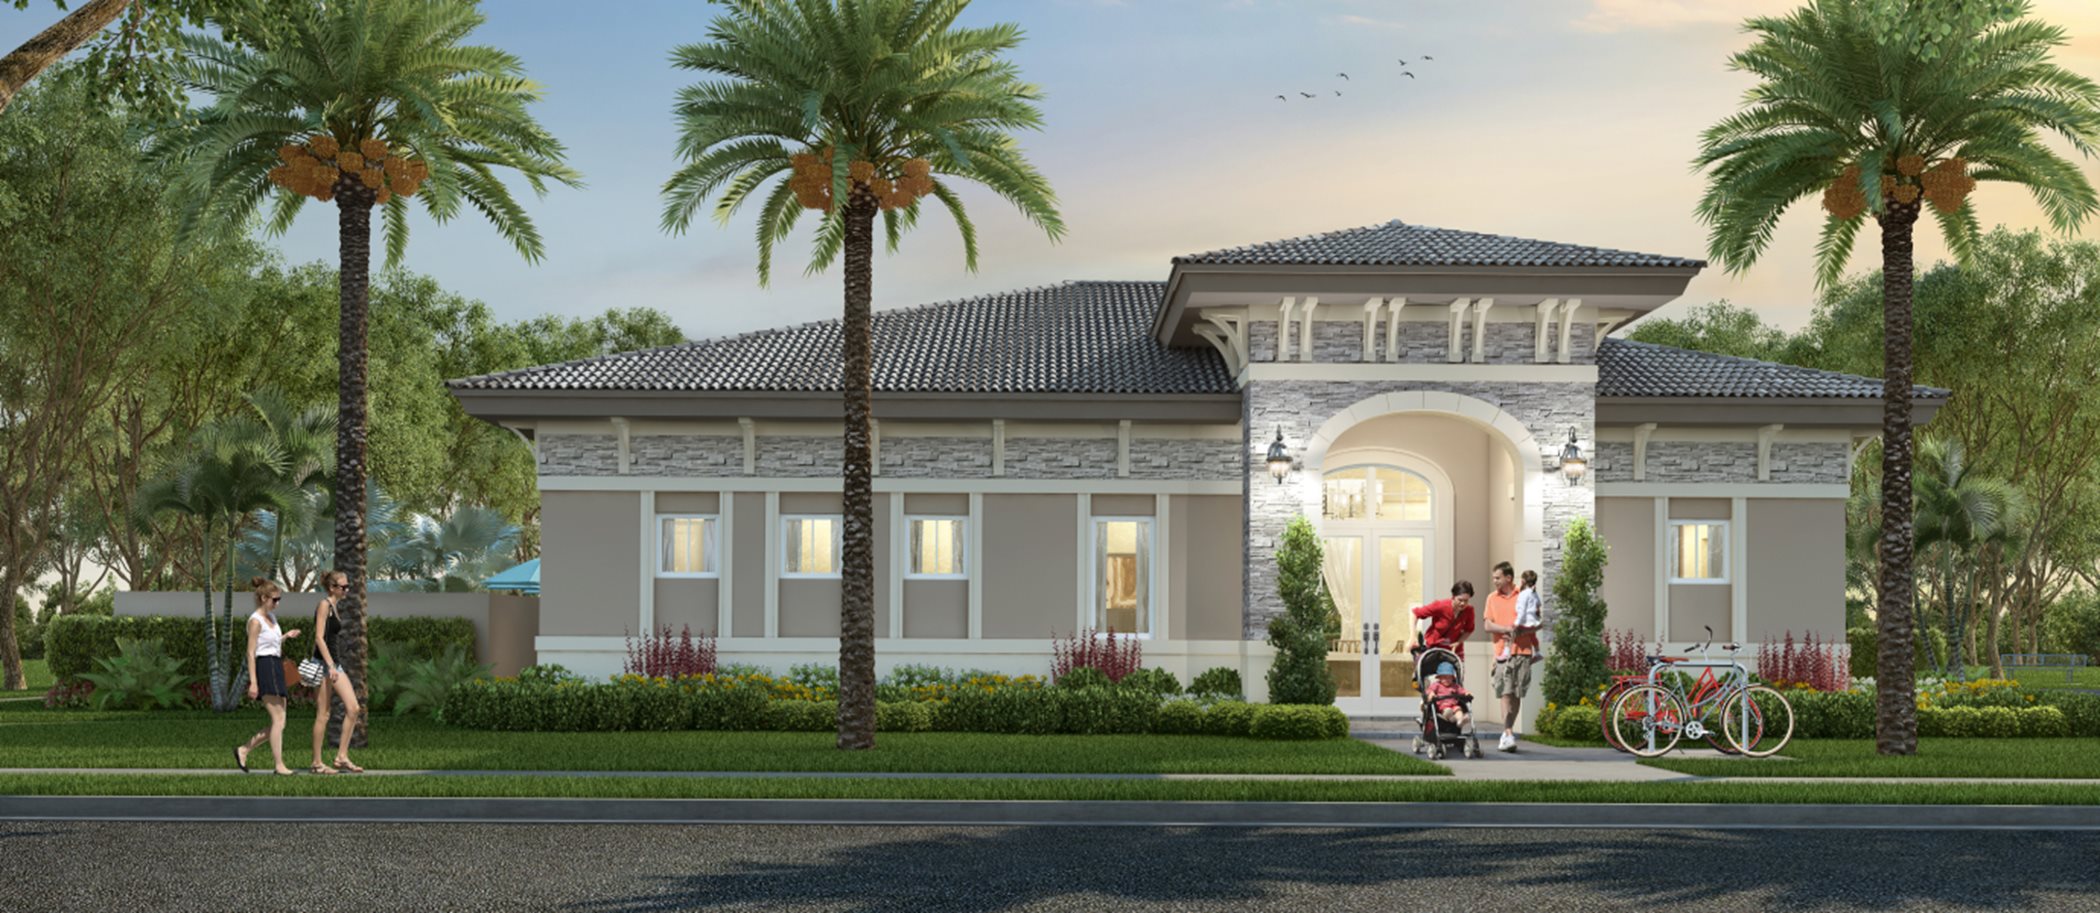 The Riviera newly designed homes easy access to Miami's downtown hub and the Florida Keys